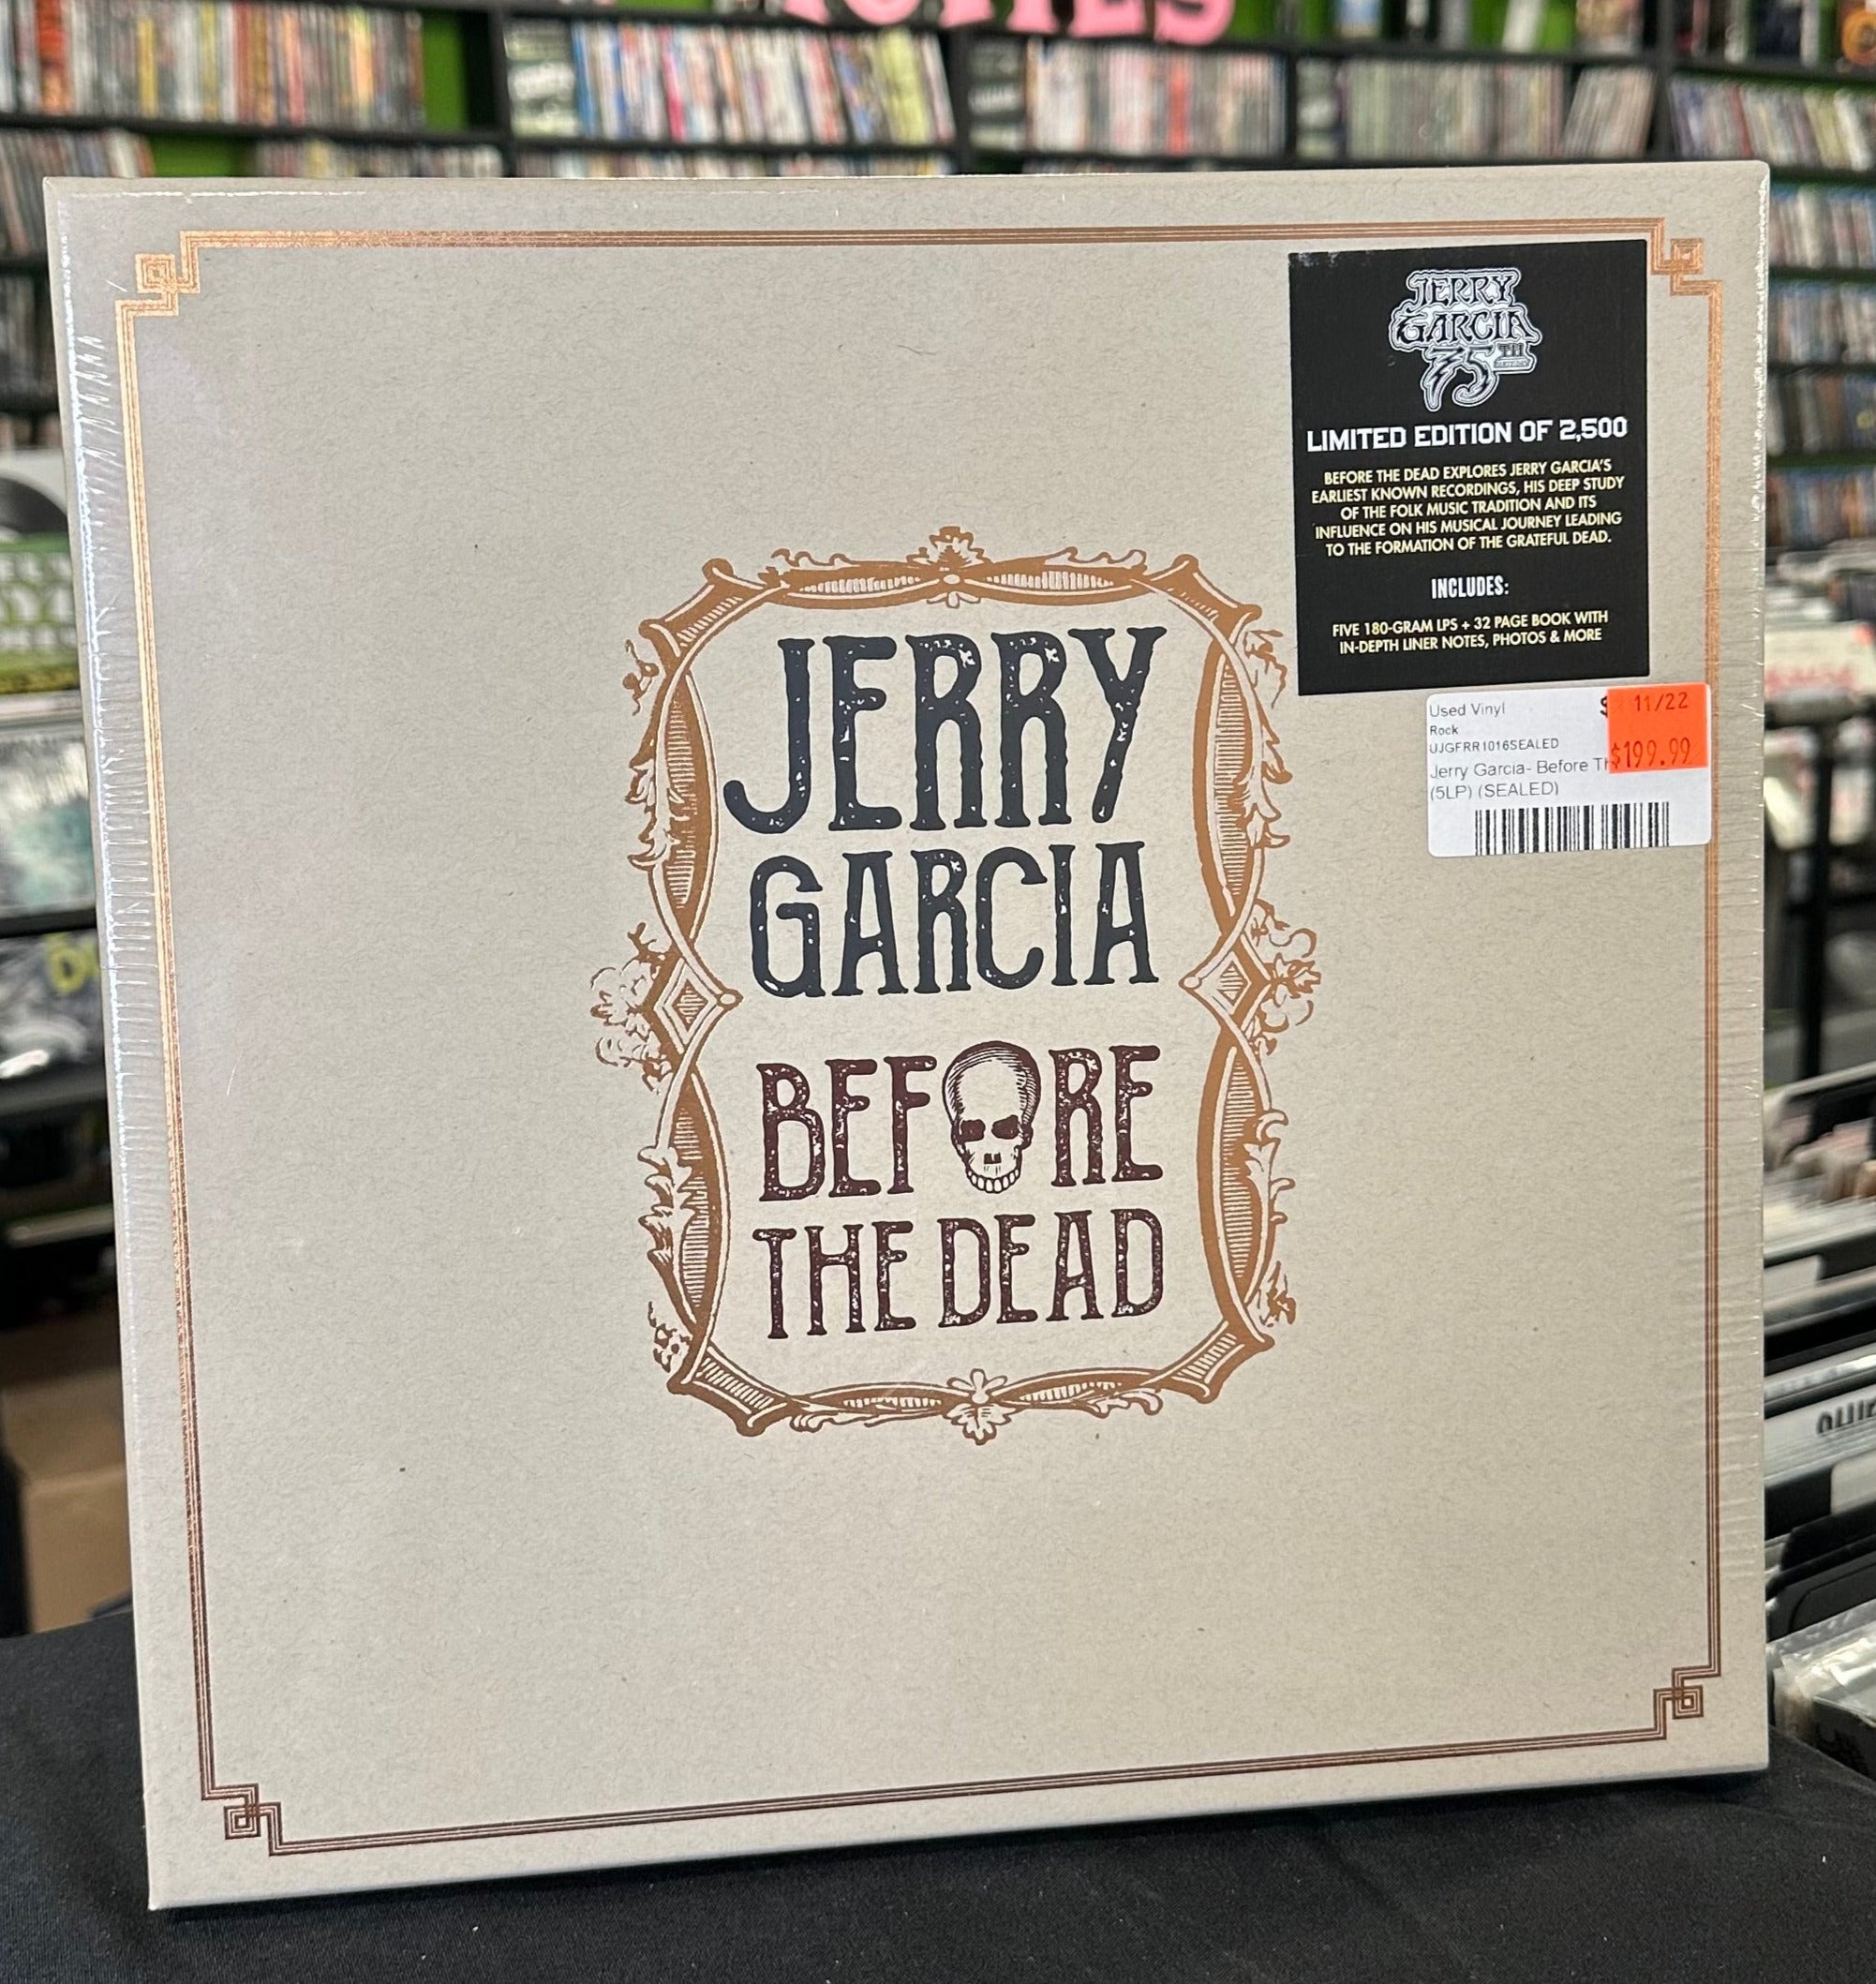 Jerry Garcia- Before The Dead (5LP) (SEALED) - Darkside Records